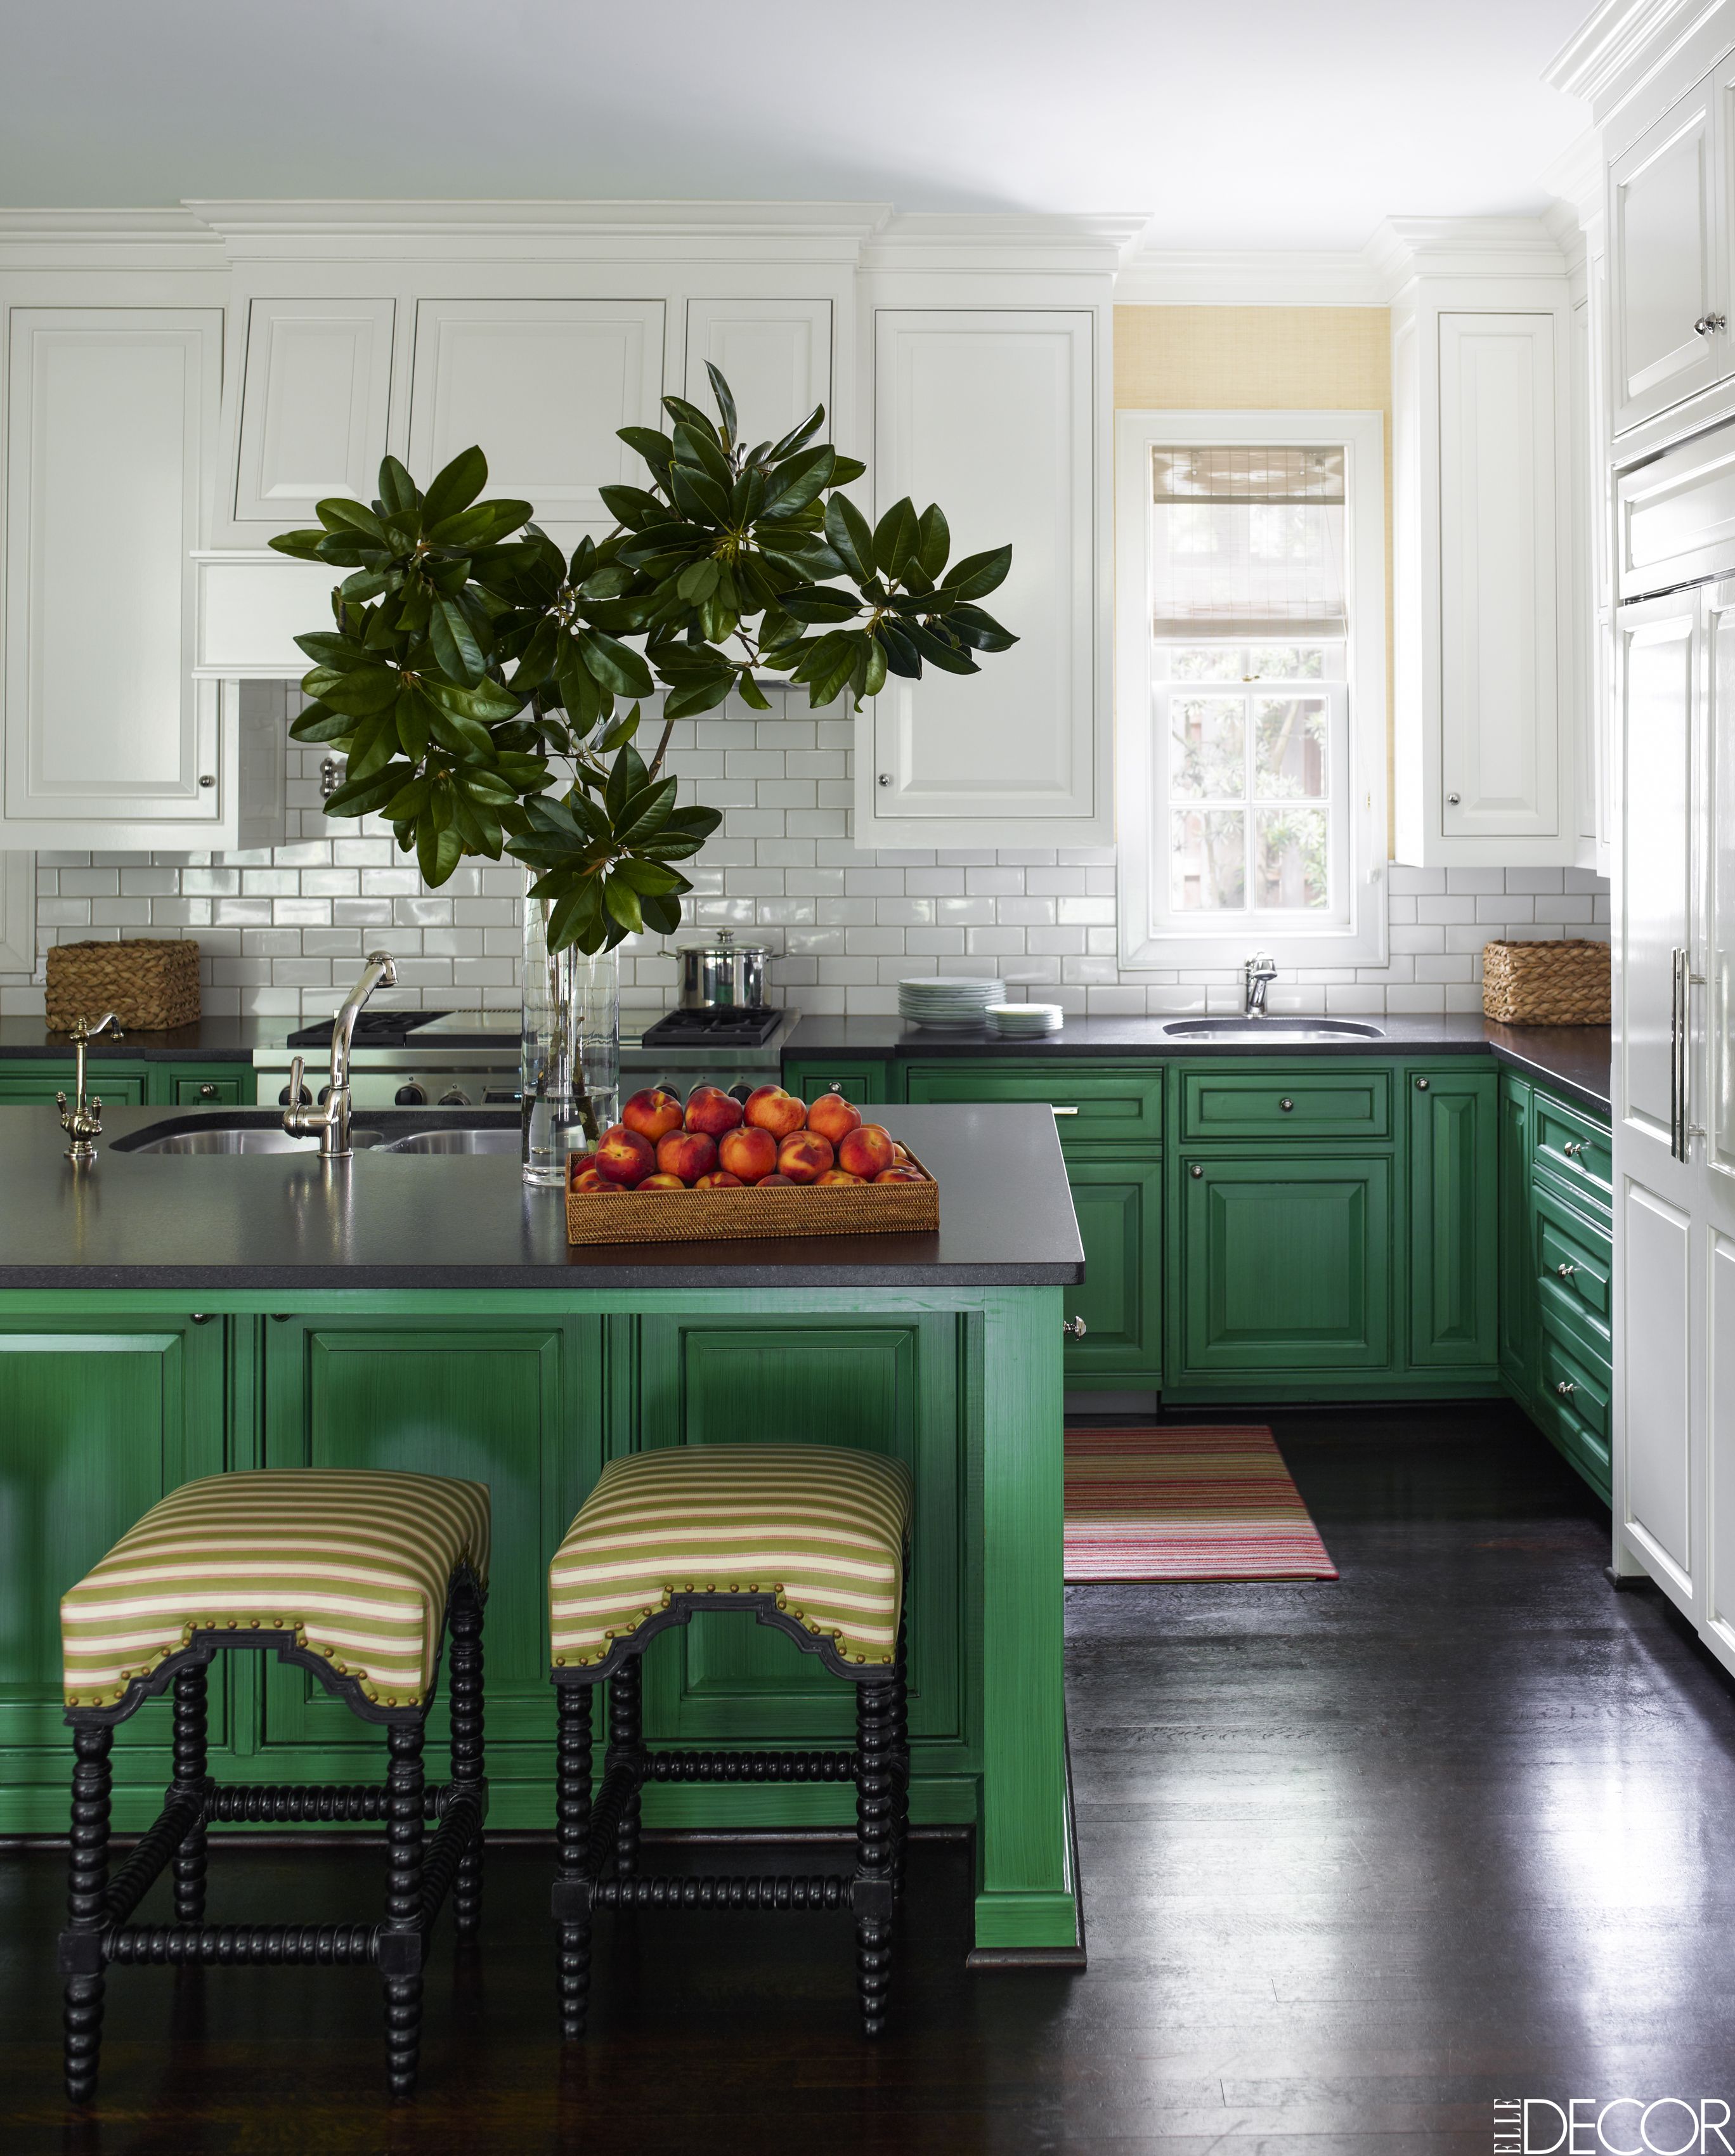 31 Green Kitchen Design Ideas Paint Colors For Green Kitchens